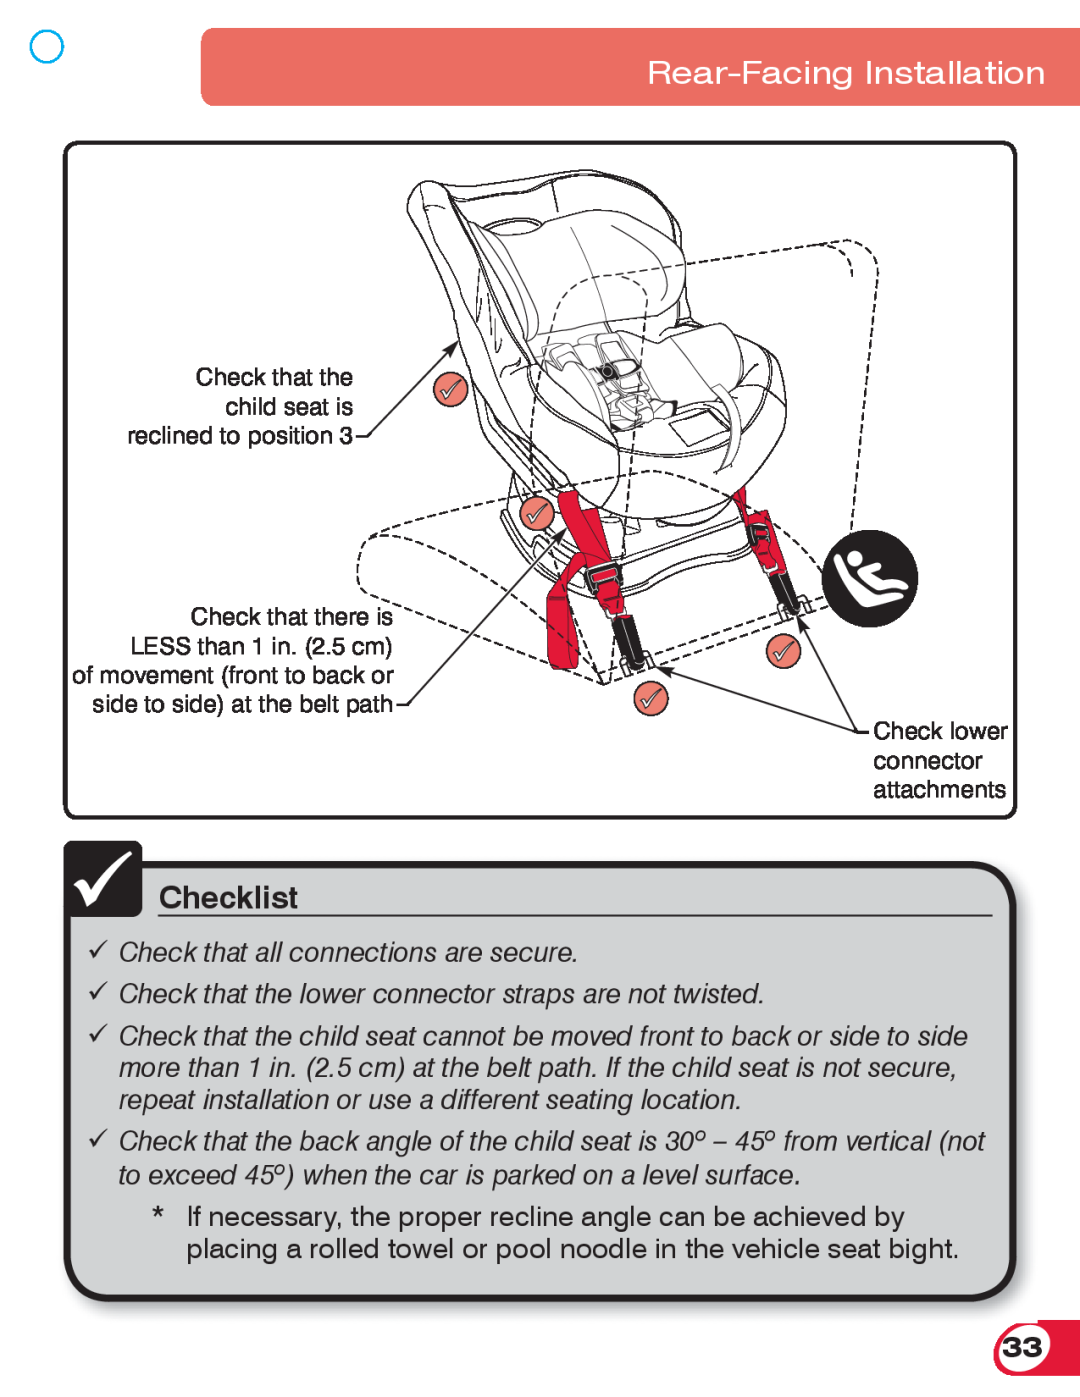 Britax 70 CS manual Rear-Facing Installation, Checklist, Check that all connections are secure 